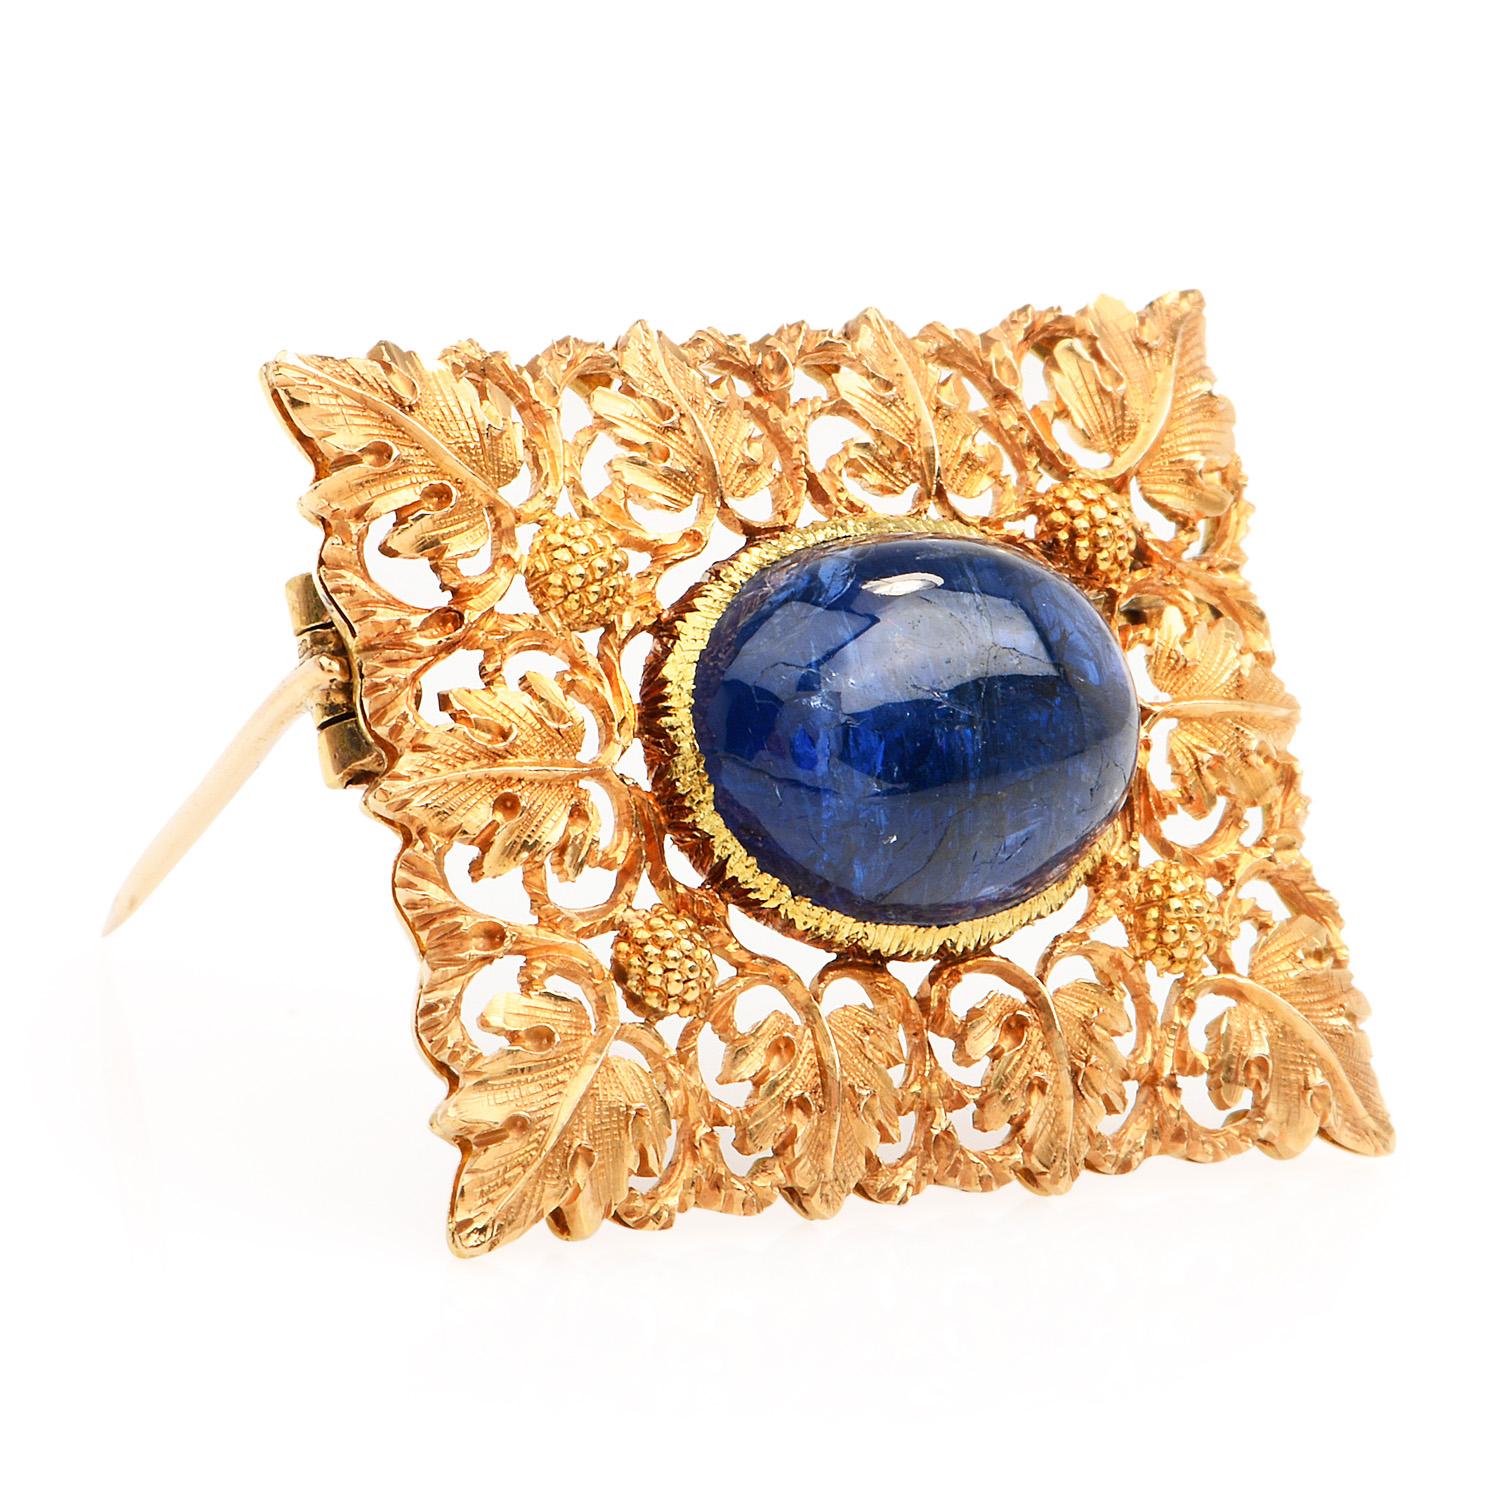 This Extraordinary rectangular Vintage  Buccellati Diamond and Sapphire Brooch.

This piece was crafted in  Luxurious 18K yellow gold.

Measuring approx. 33 mm x 25 mm,  this brooch

features 1 Natural No Heat cabochon  Blue Sapphire in the center